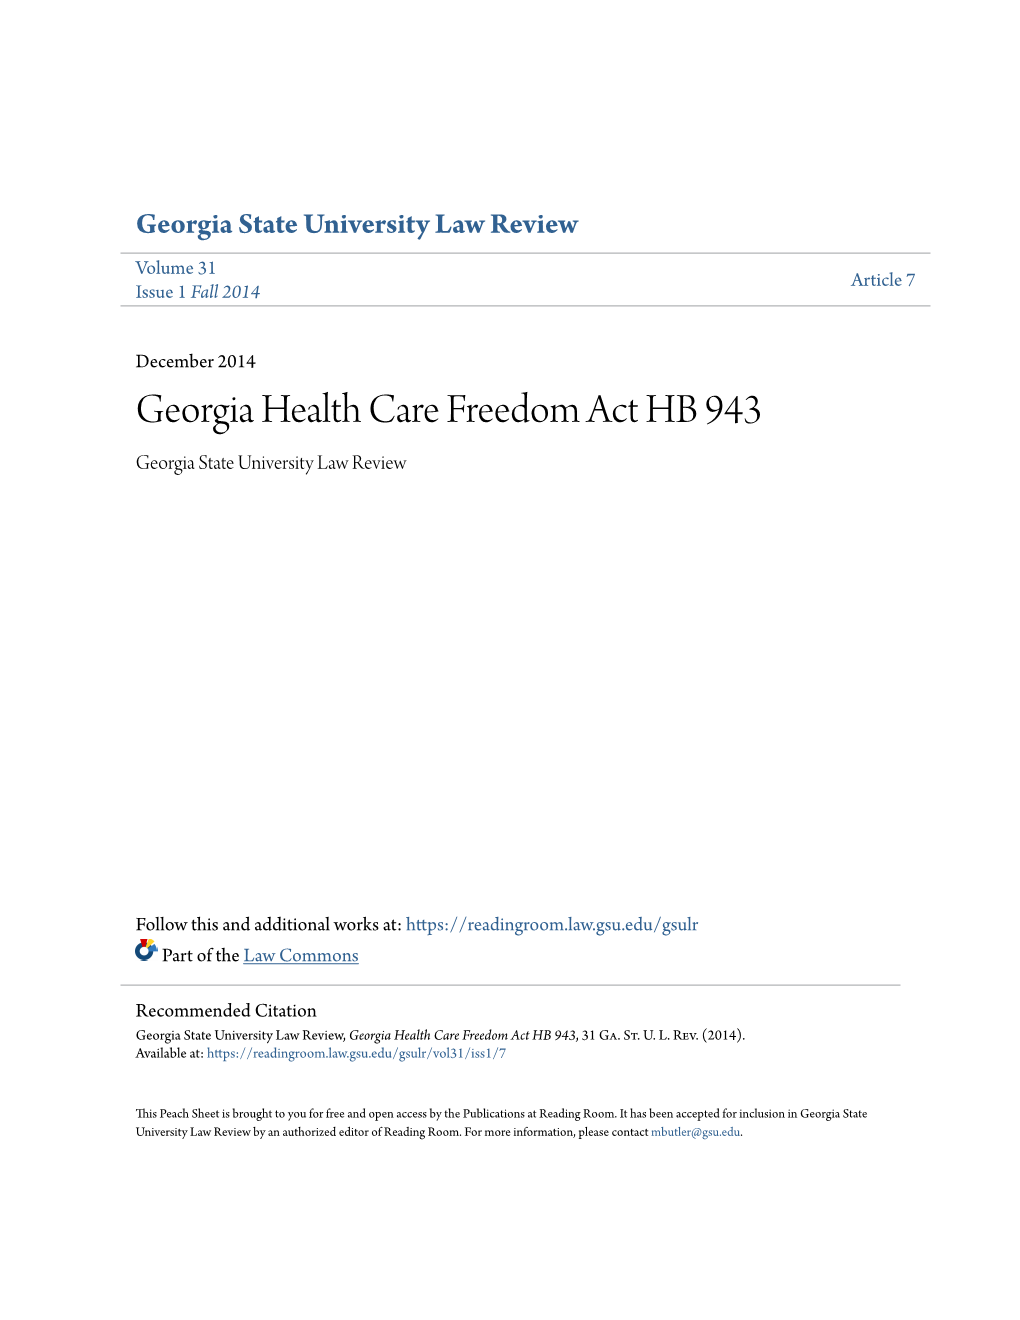 Georgia Health Care Freedom Act HB 943 Georgia State University Law Review